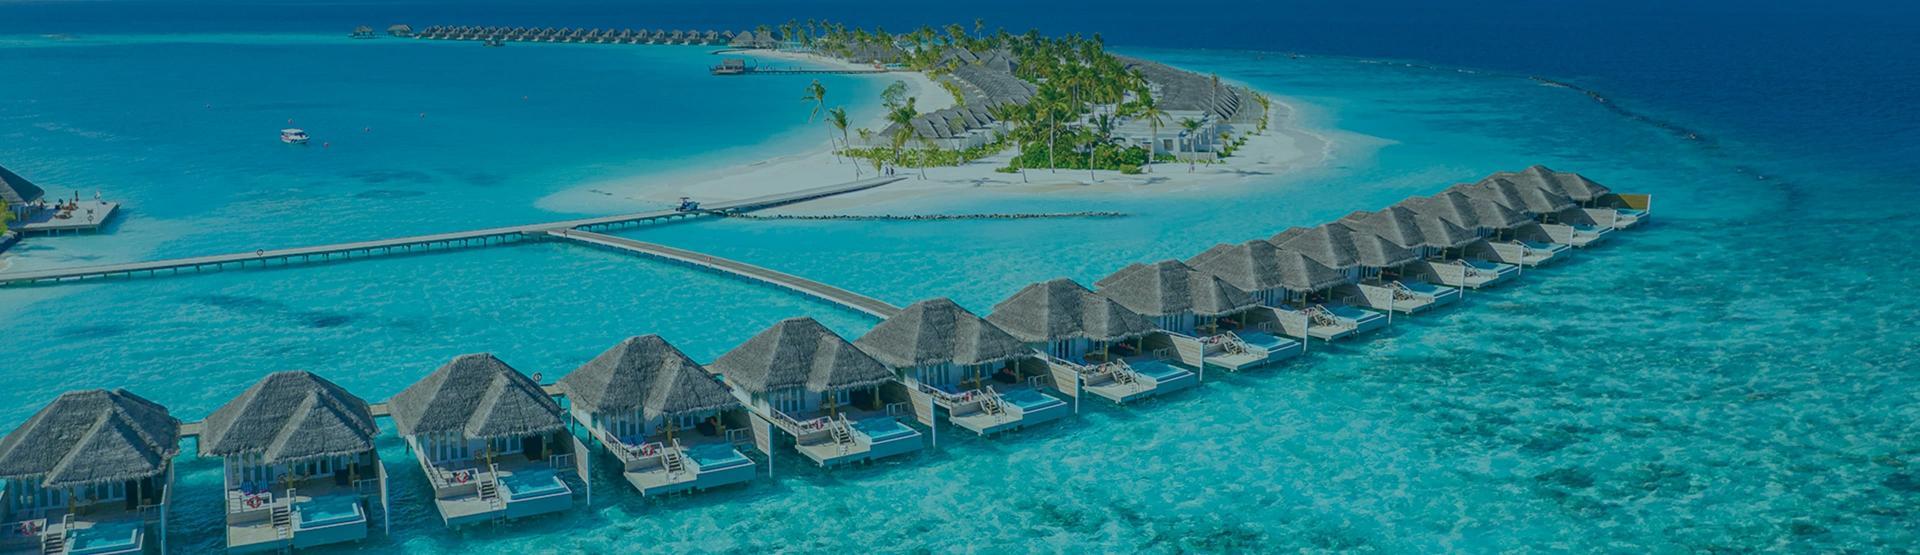 Find and Book Any Hotel in Maldives